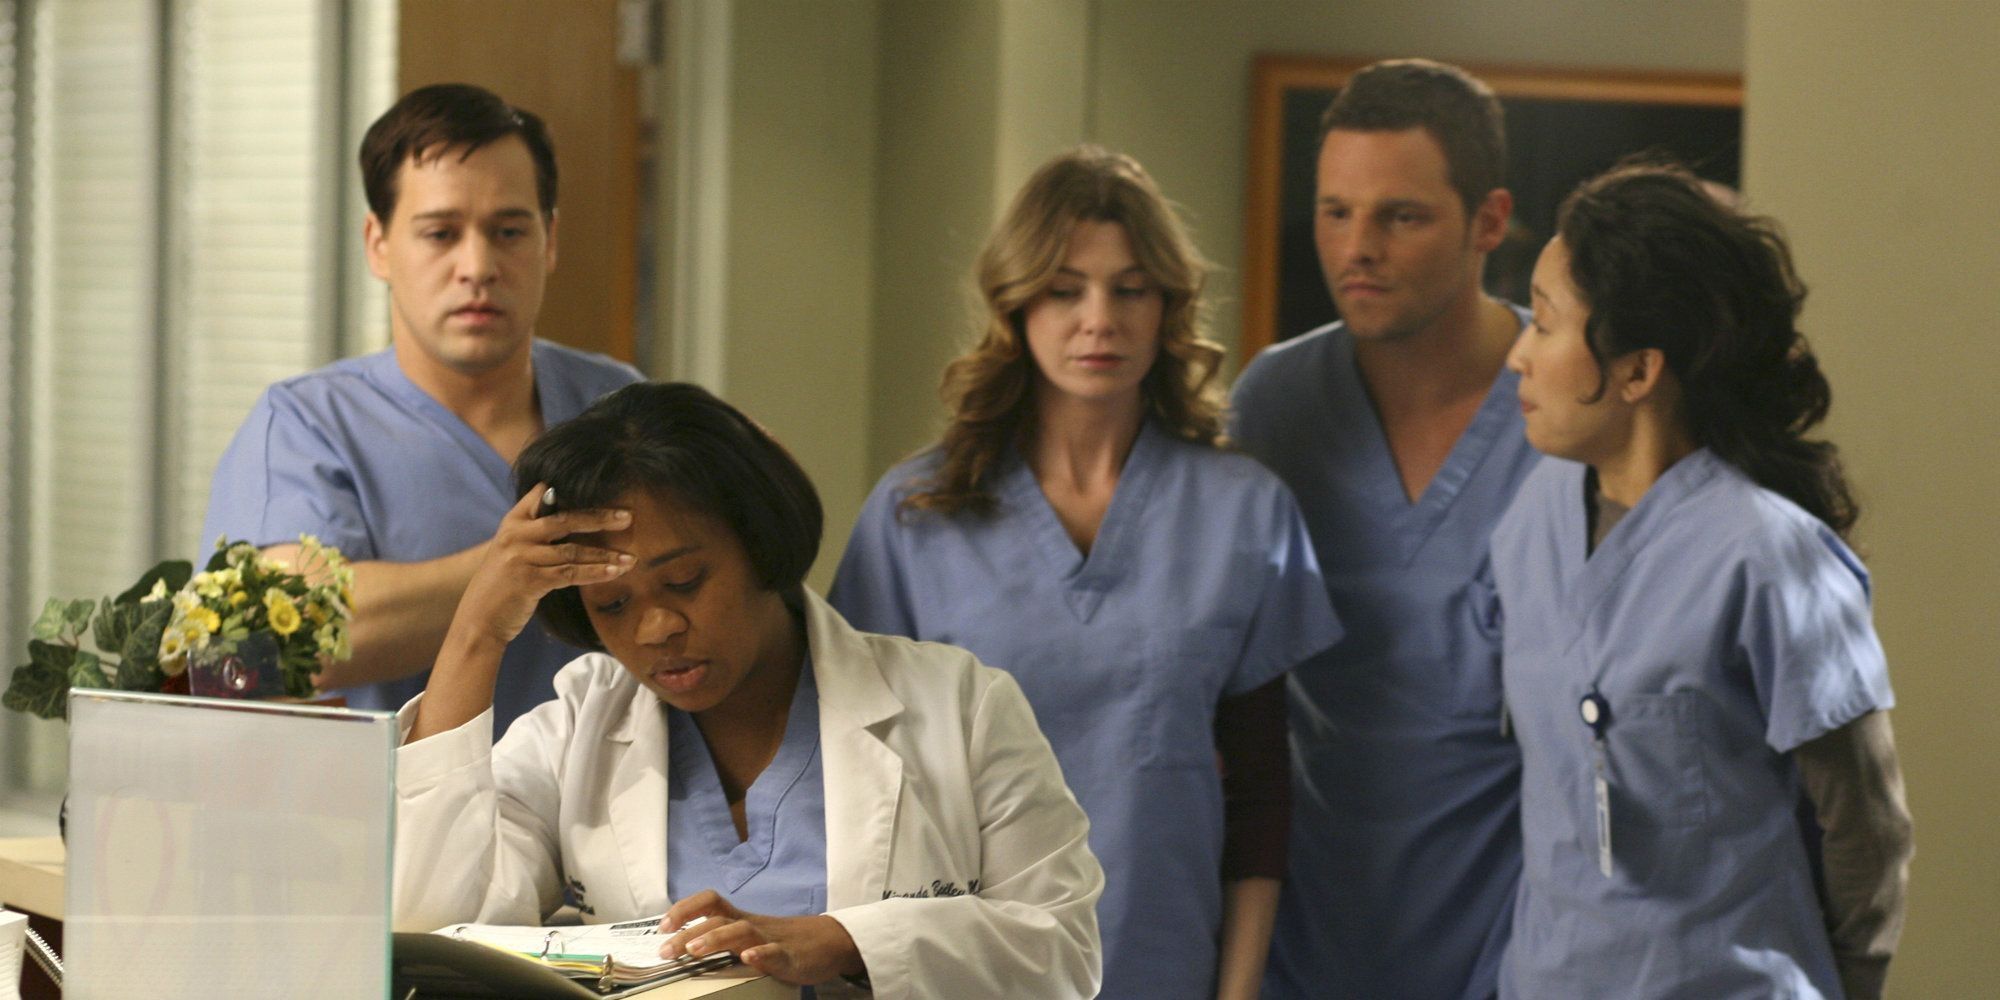 10 Reasons Fans Are Still Watching Grey's Anatomy, According To Reddit